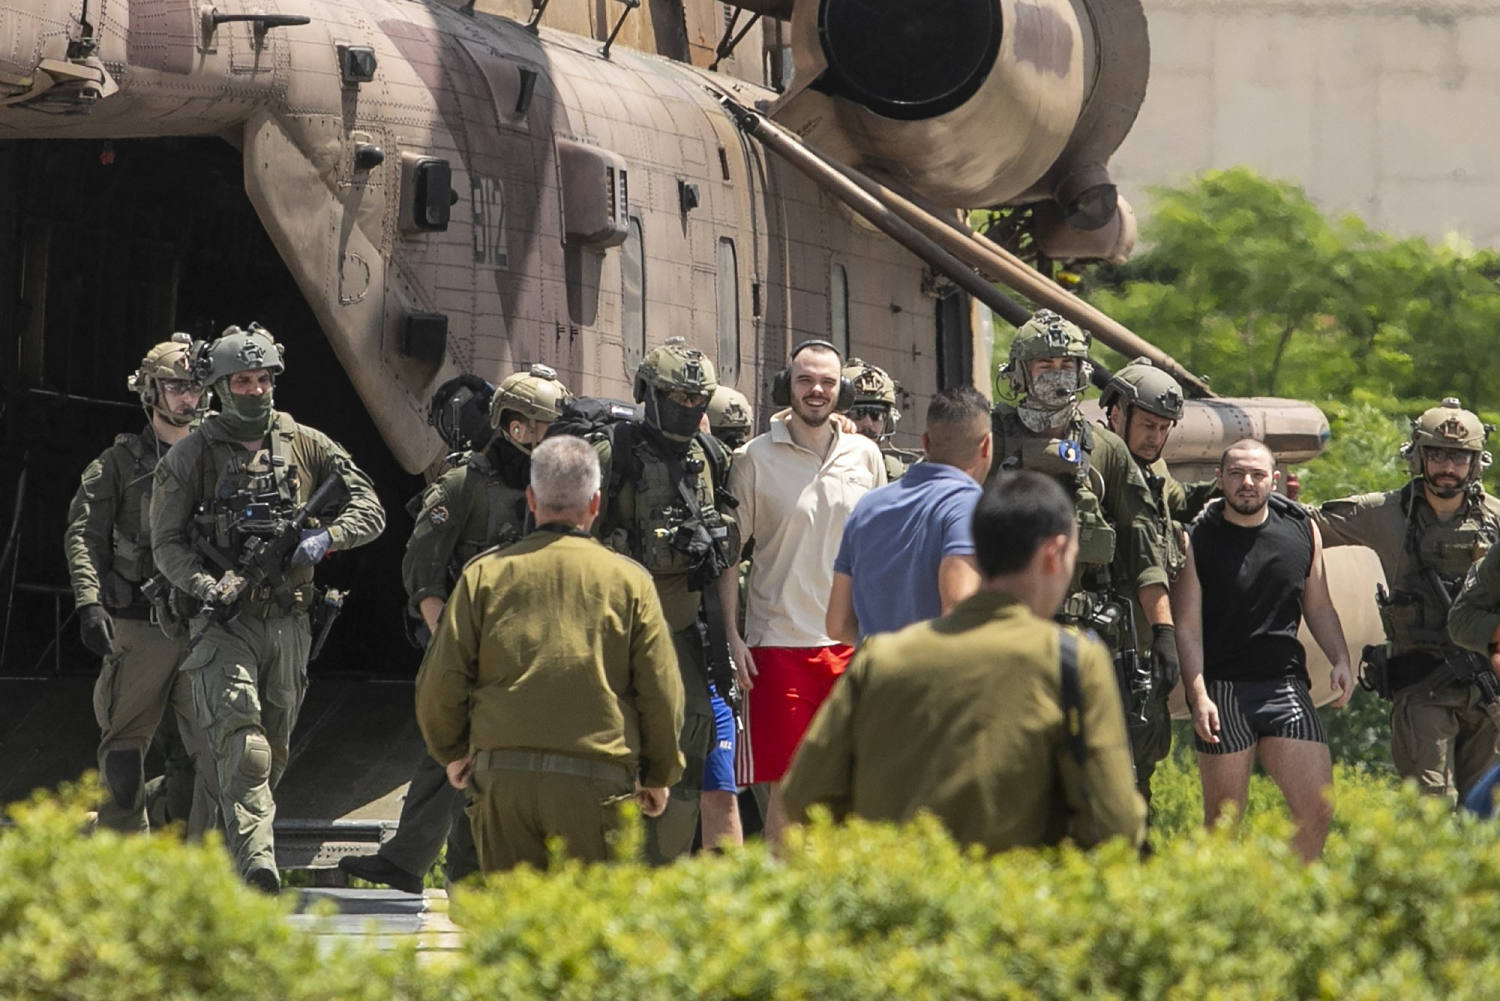 IDF faces increased scrutiny as more details come out in wake of deadly hostage rescue